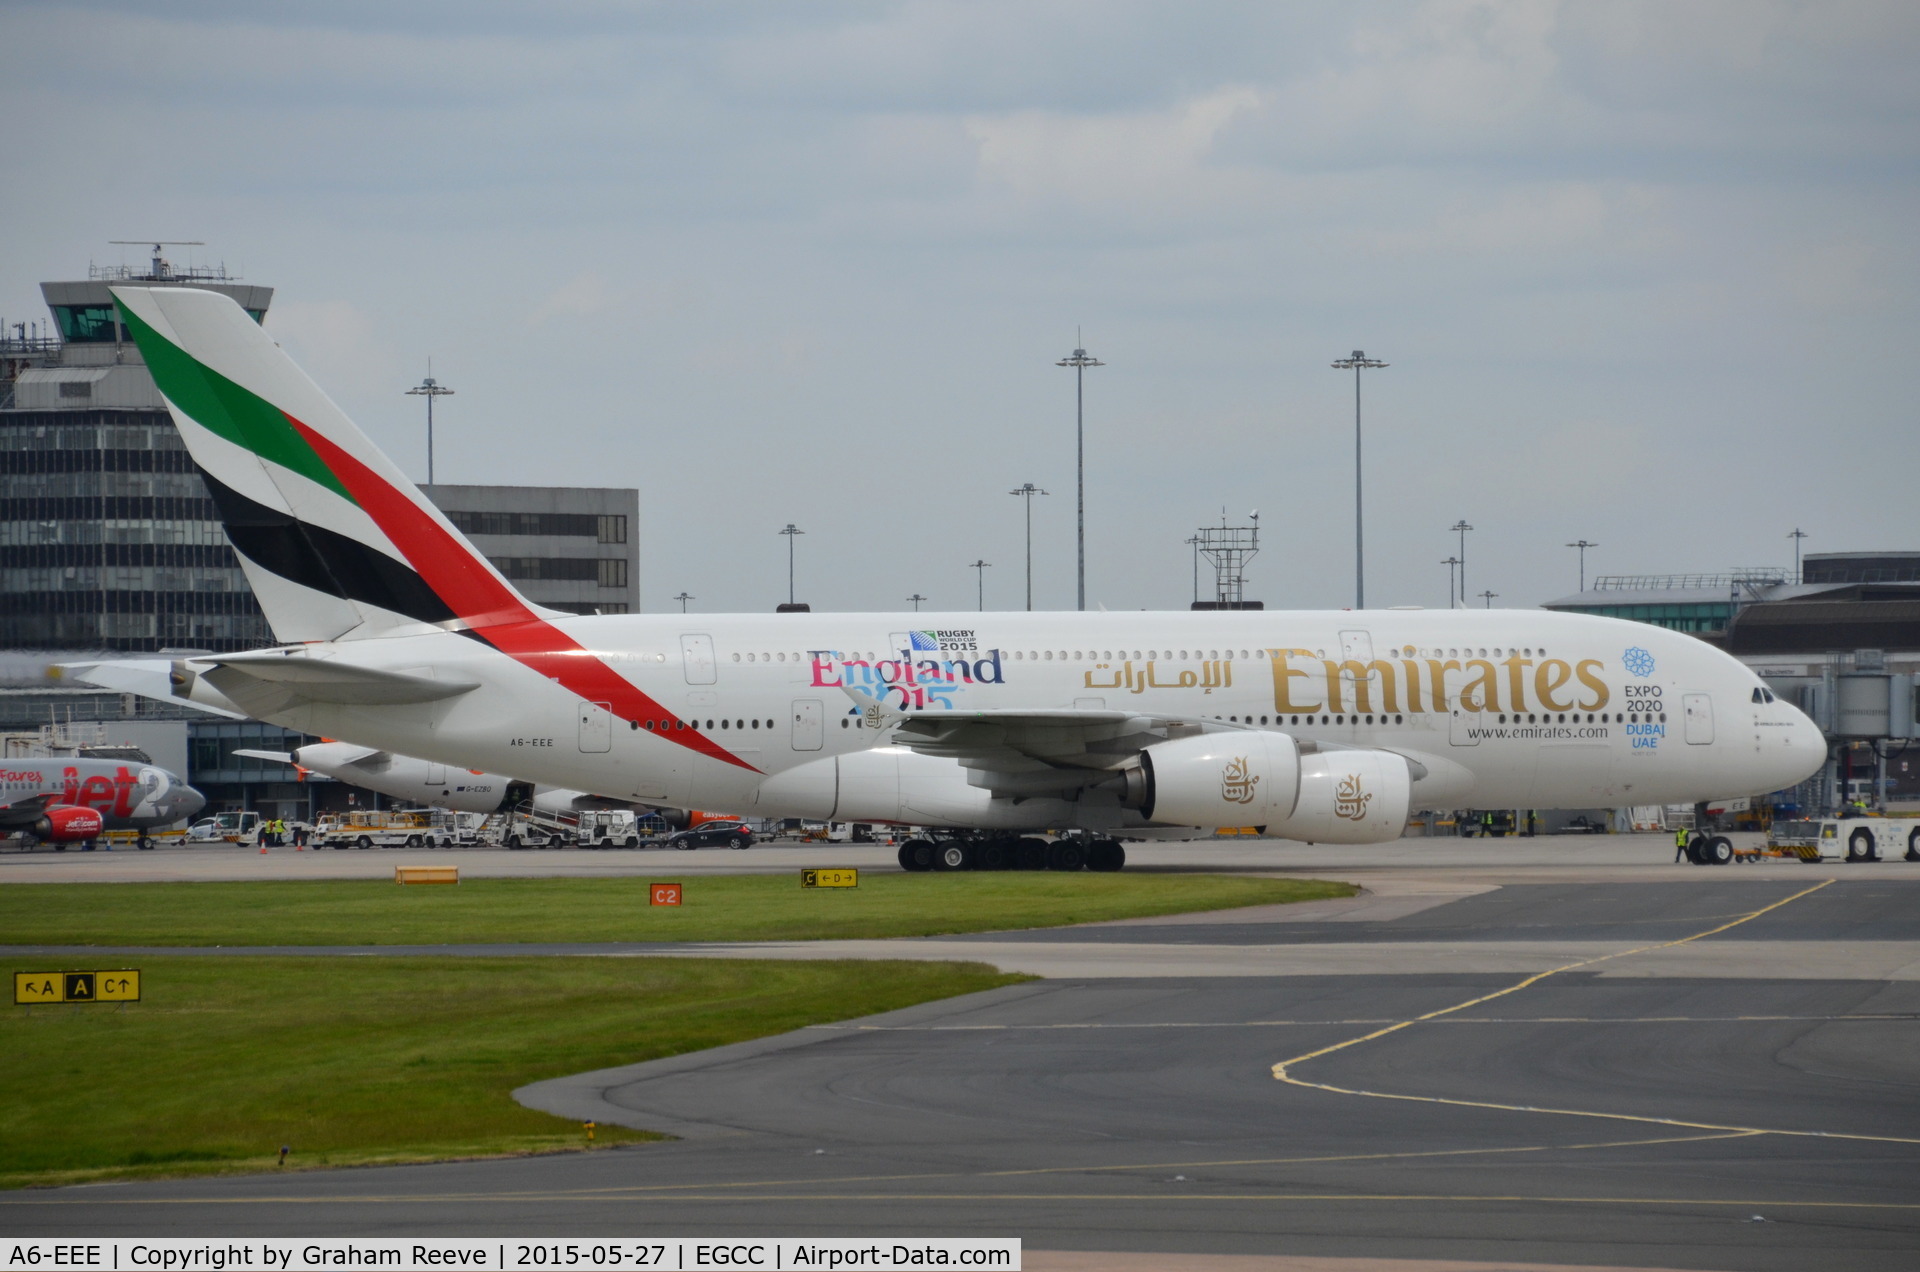 A6-EEE, 2012 Airbus A380-861 C/N 112, About to depart.